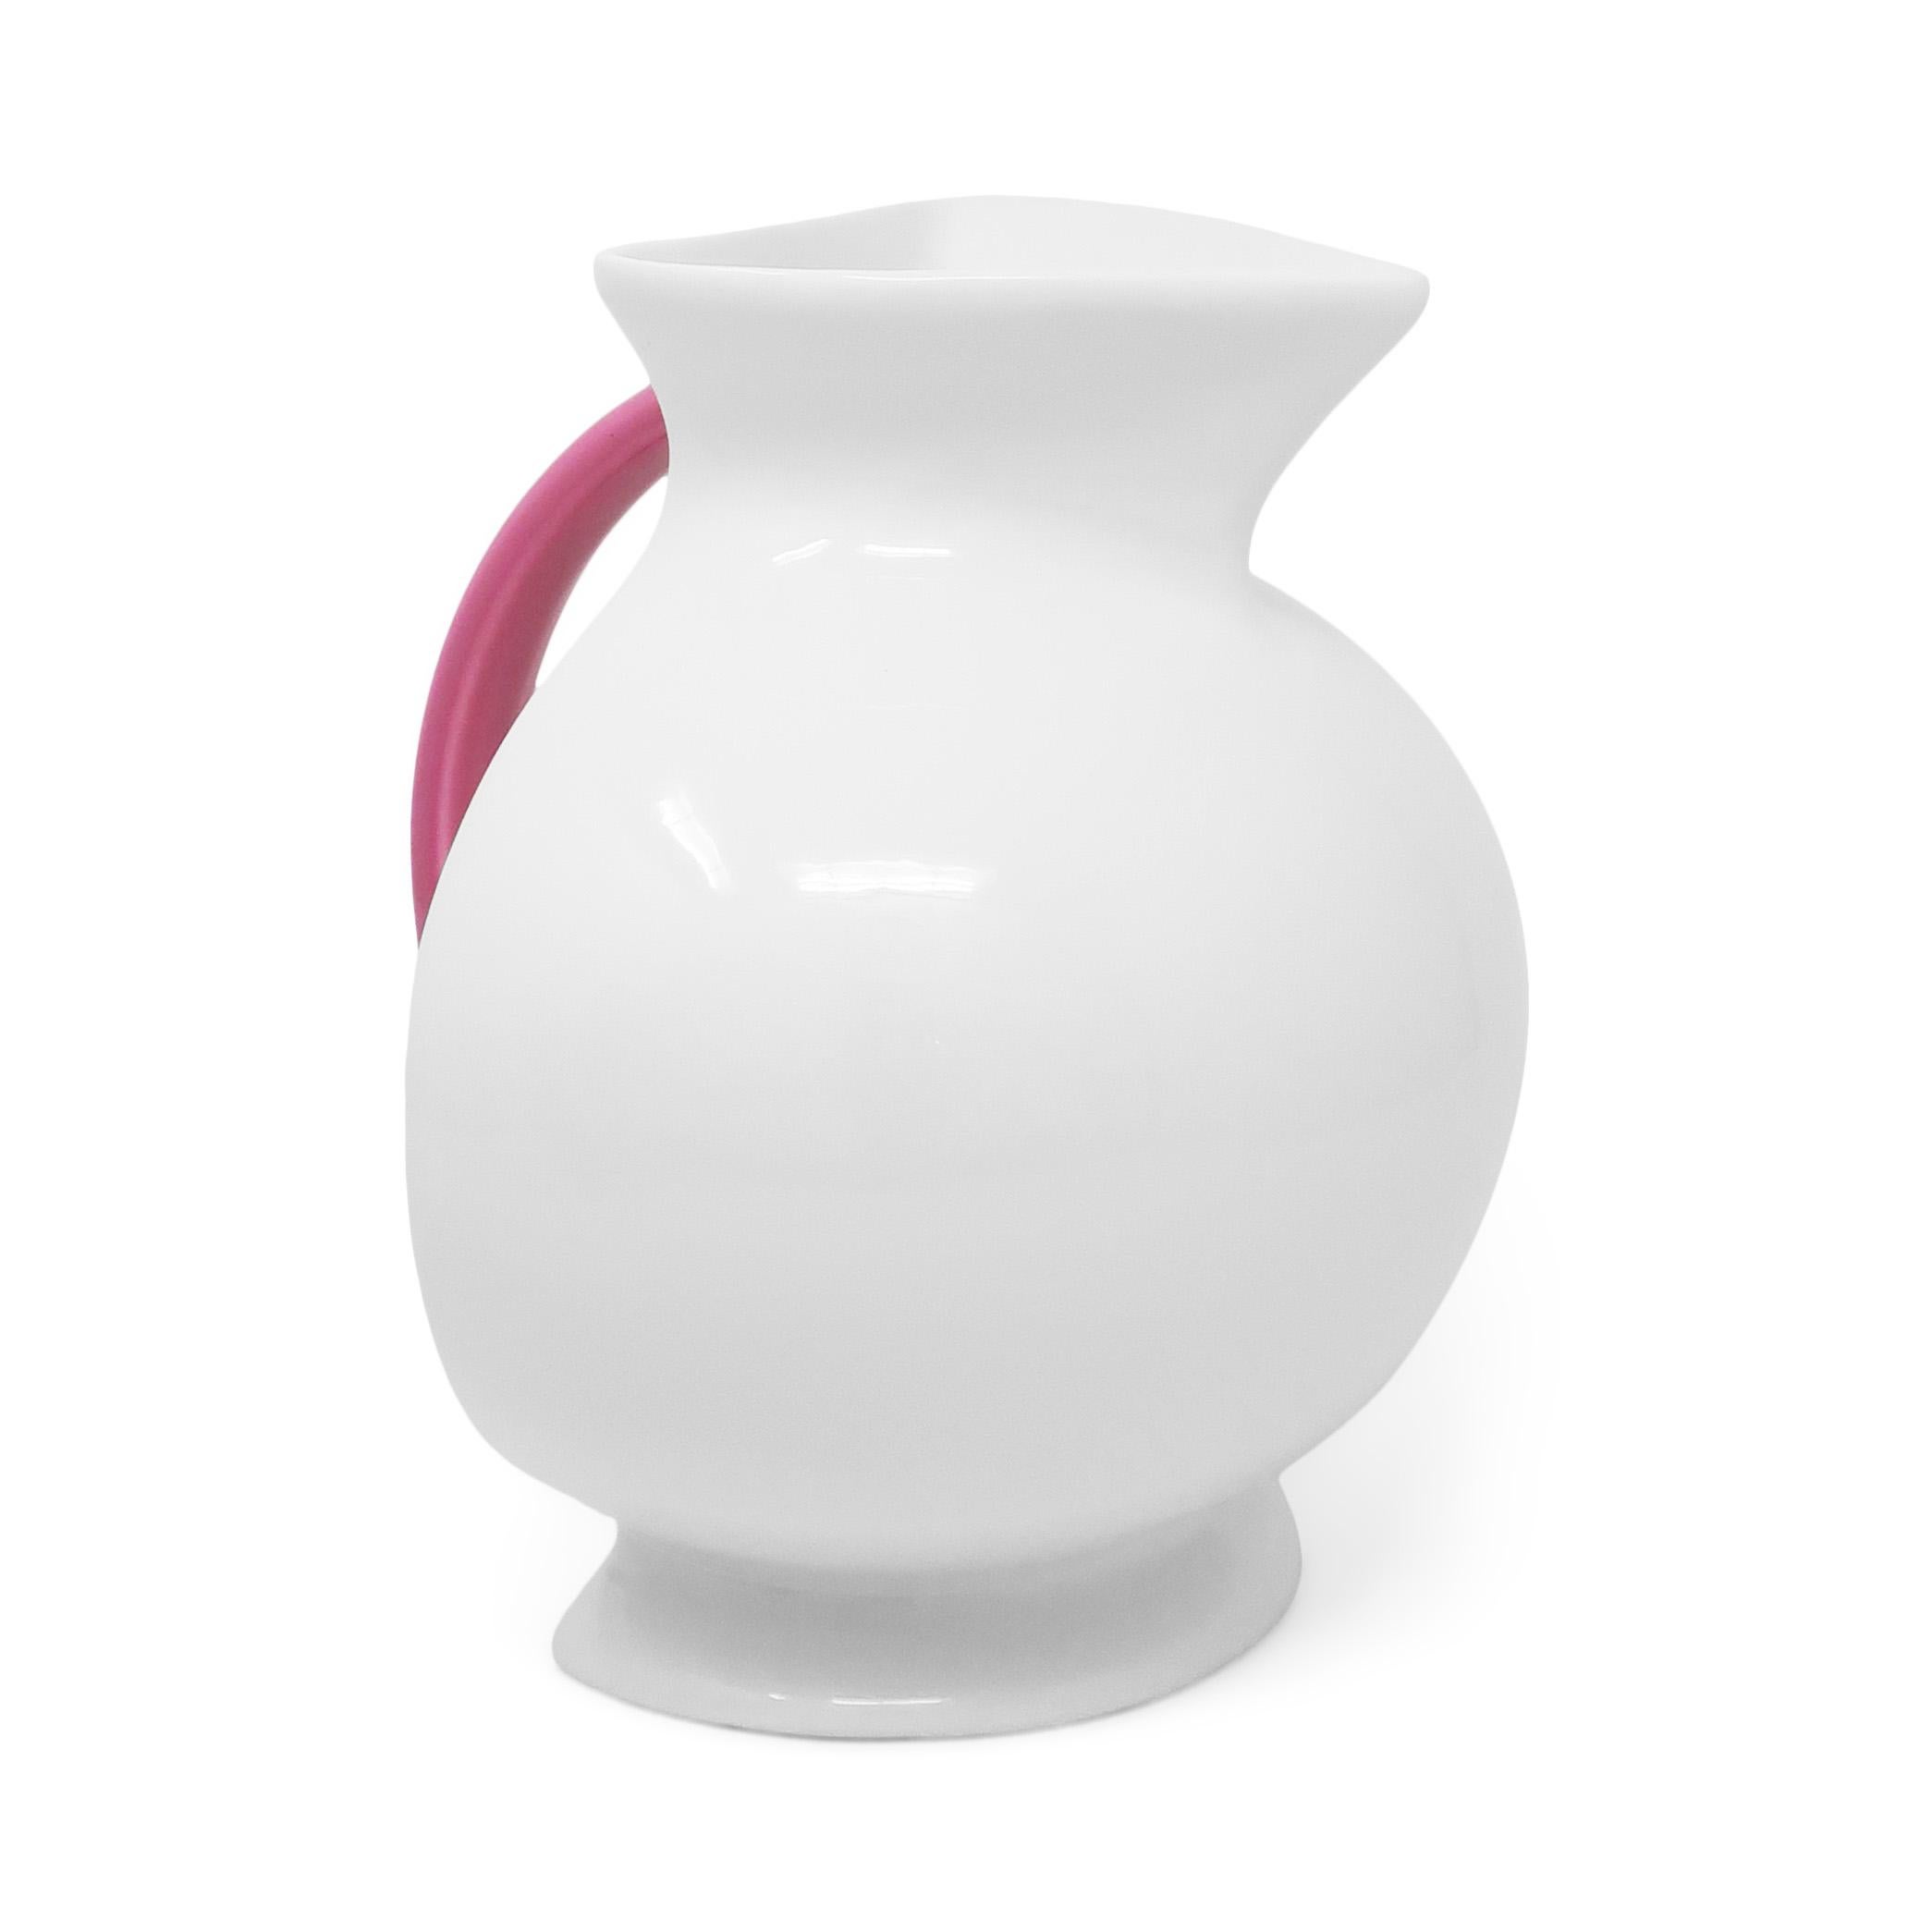 1980s Postmodern White Ceramic Pitcher by Marco Zanini for Bitossi In Good Condition For Sale In Brooklyn, NY